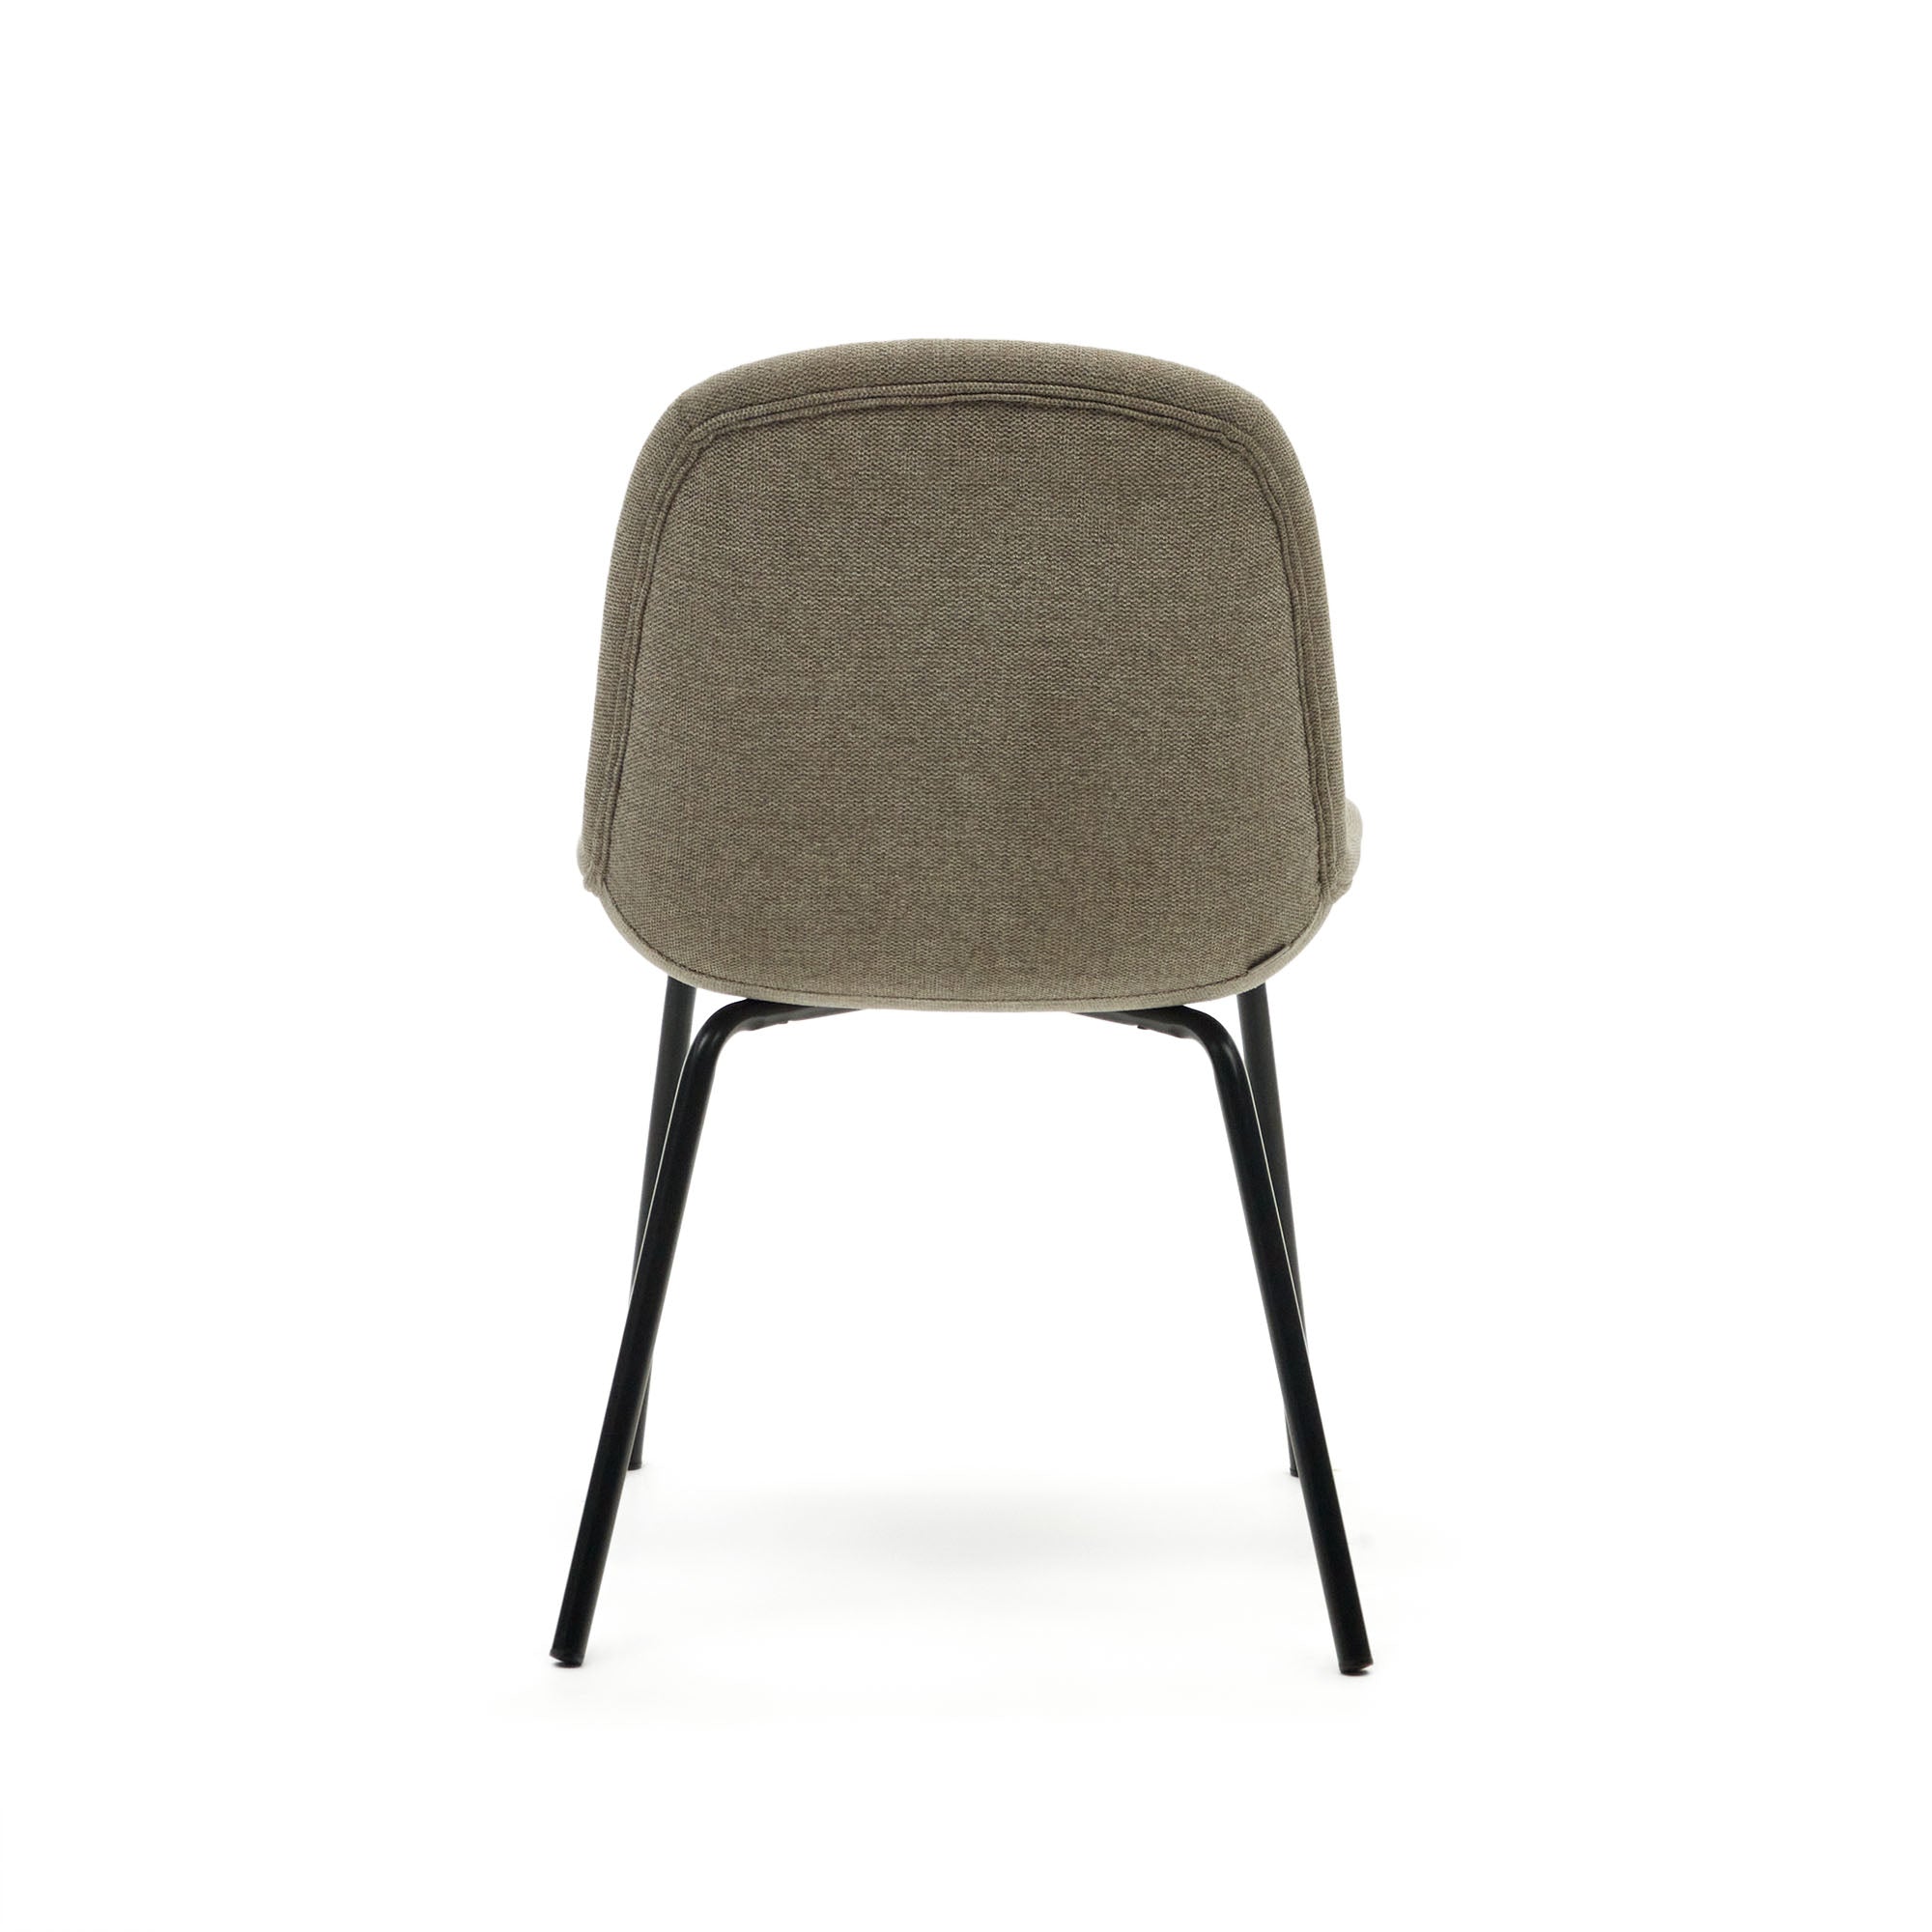 Aimin chair in brown chenille and steel legs with a matte black painted finish